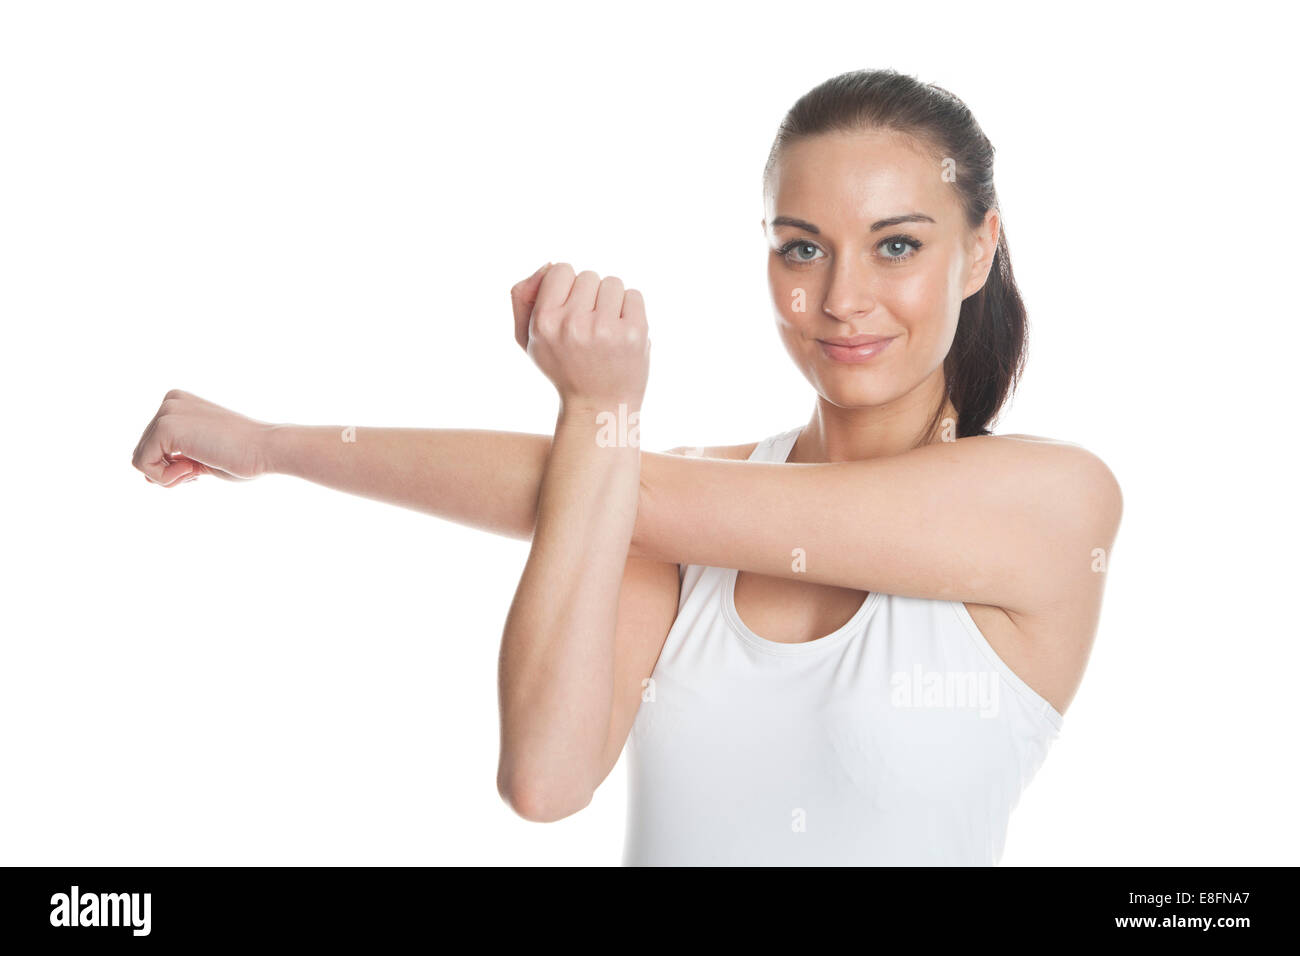 Young sportswoman stretching Stock Photo